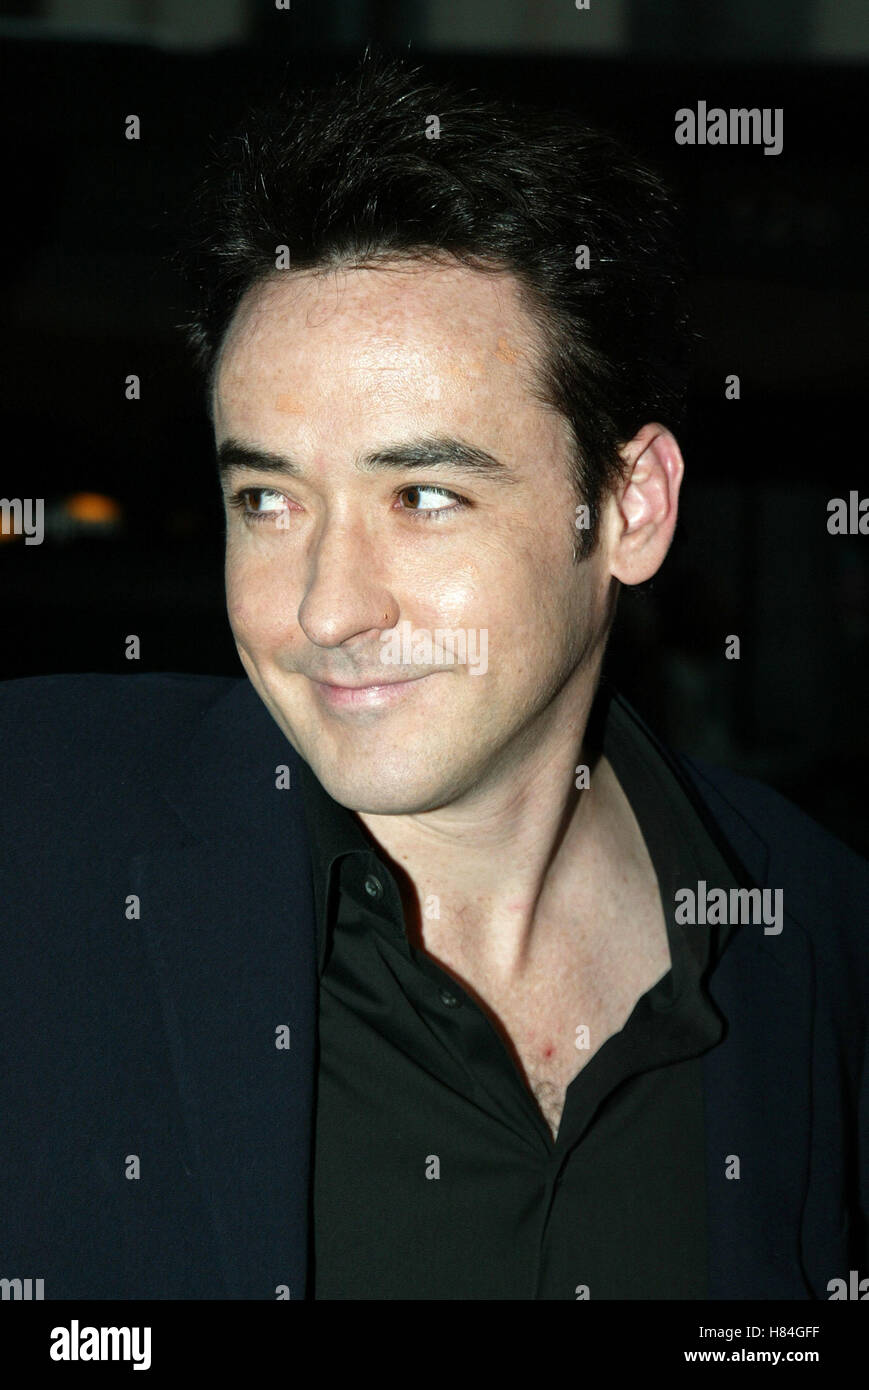 JOHN CUSACK LAST CALL FILM PREMIERE BEVERLY HILLS LOS ANGELES USA 22 May 2002 Stock Photo